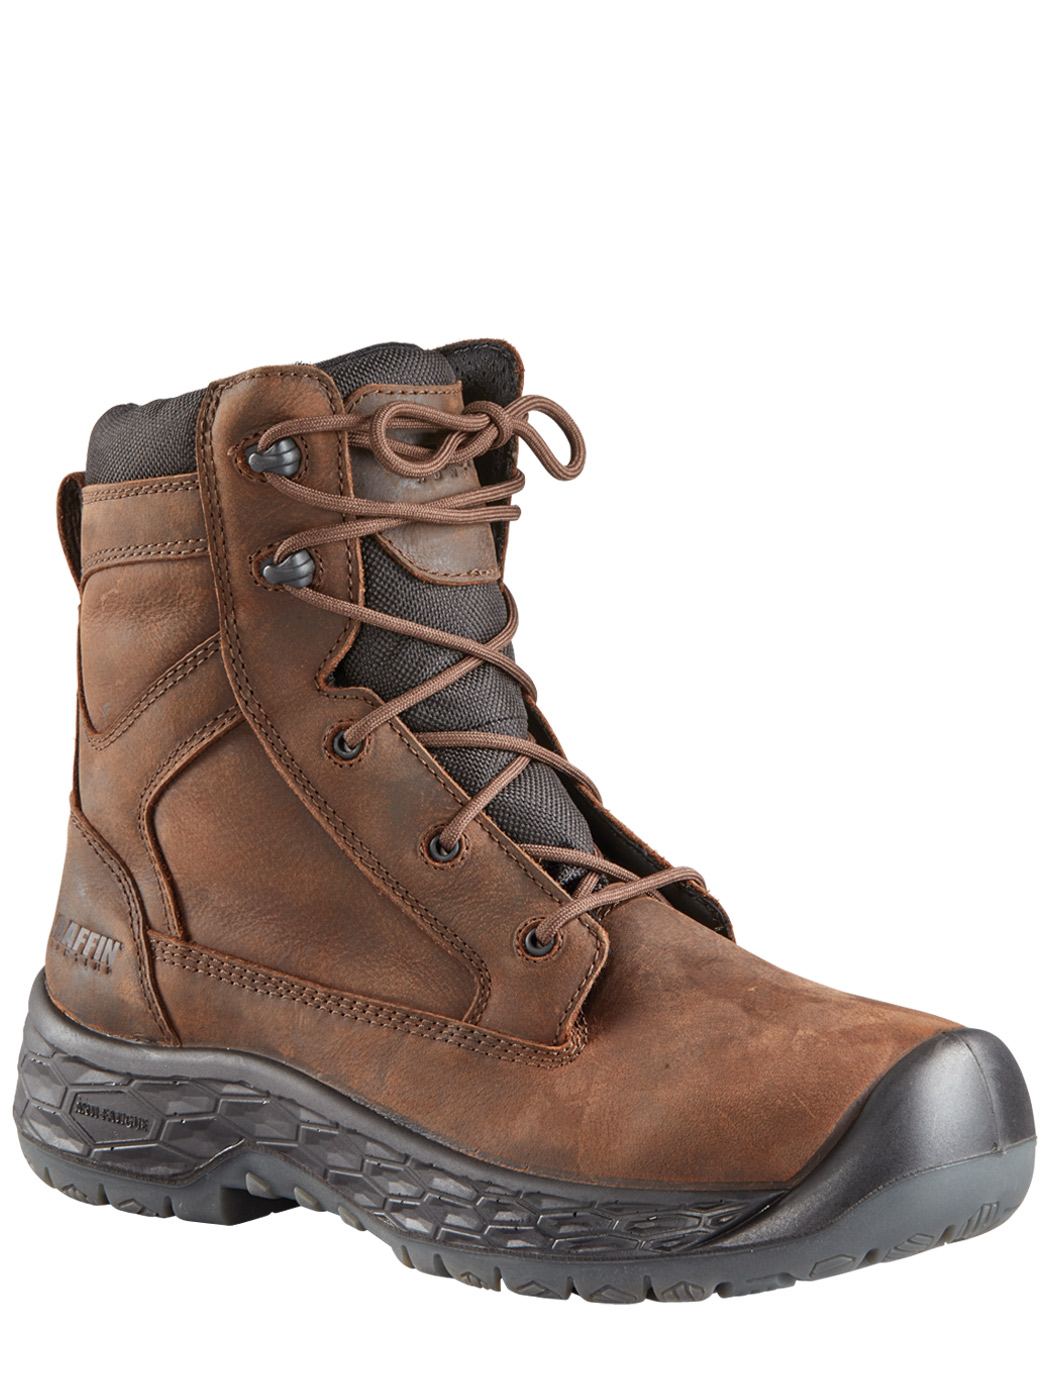 Baffin Pacer Hunt & Fish Waterproof Boot - CFLXM006